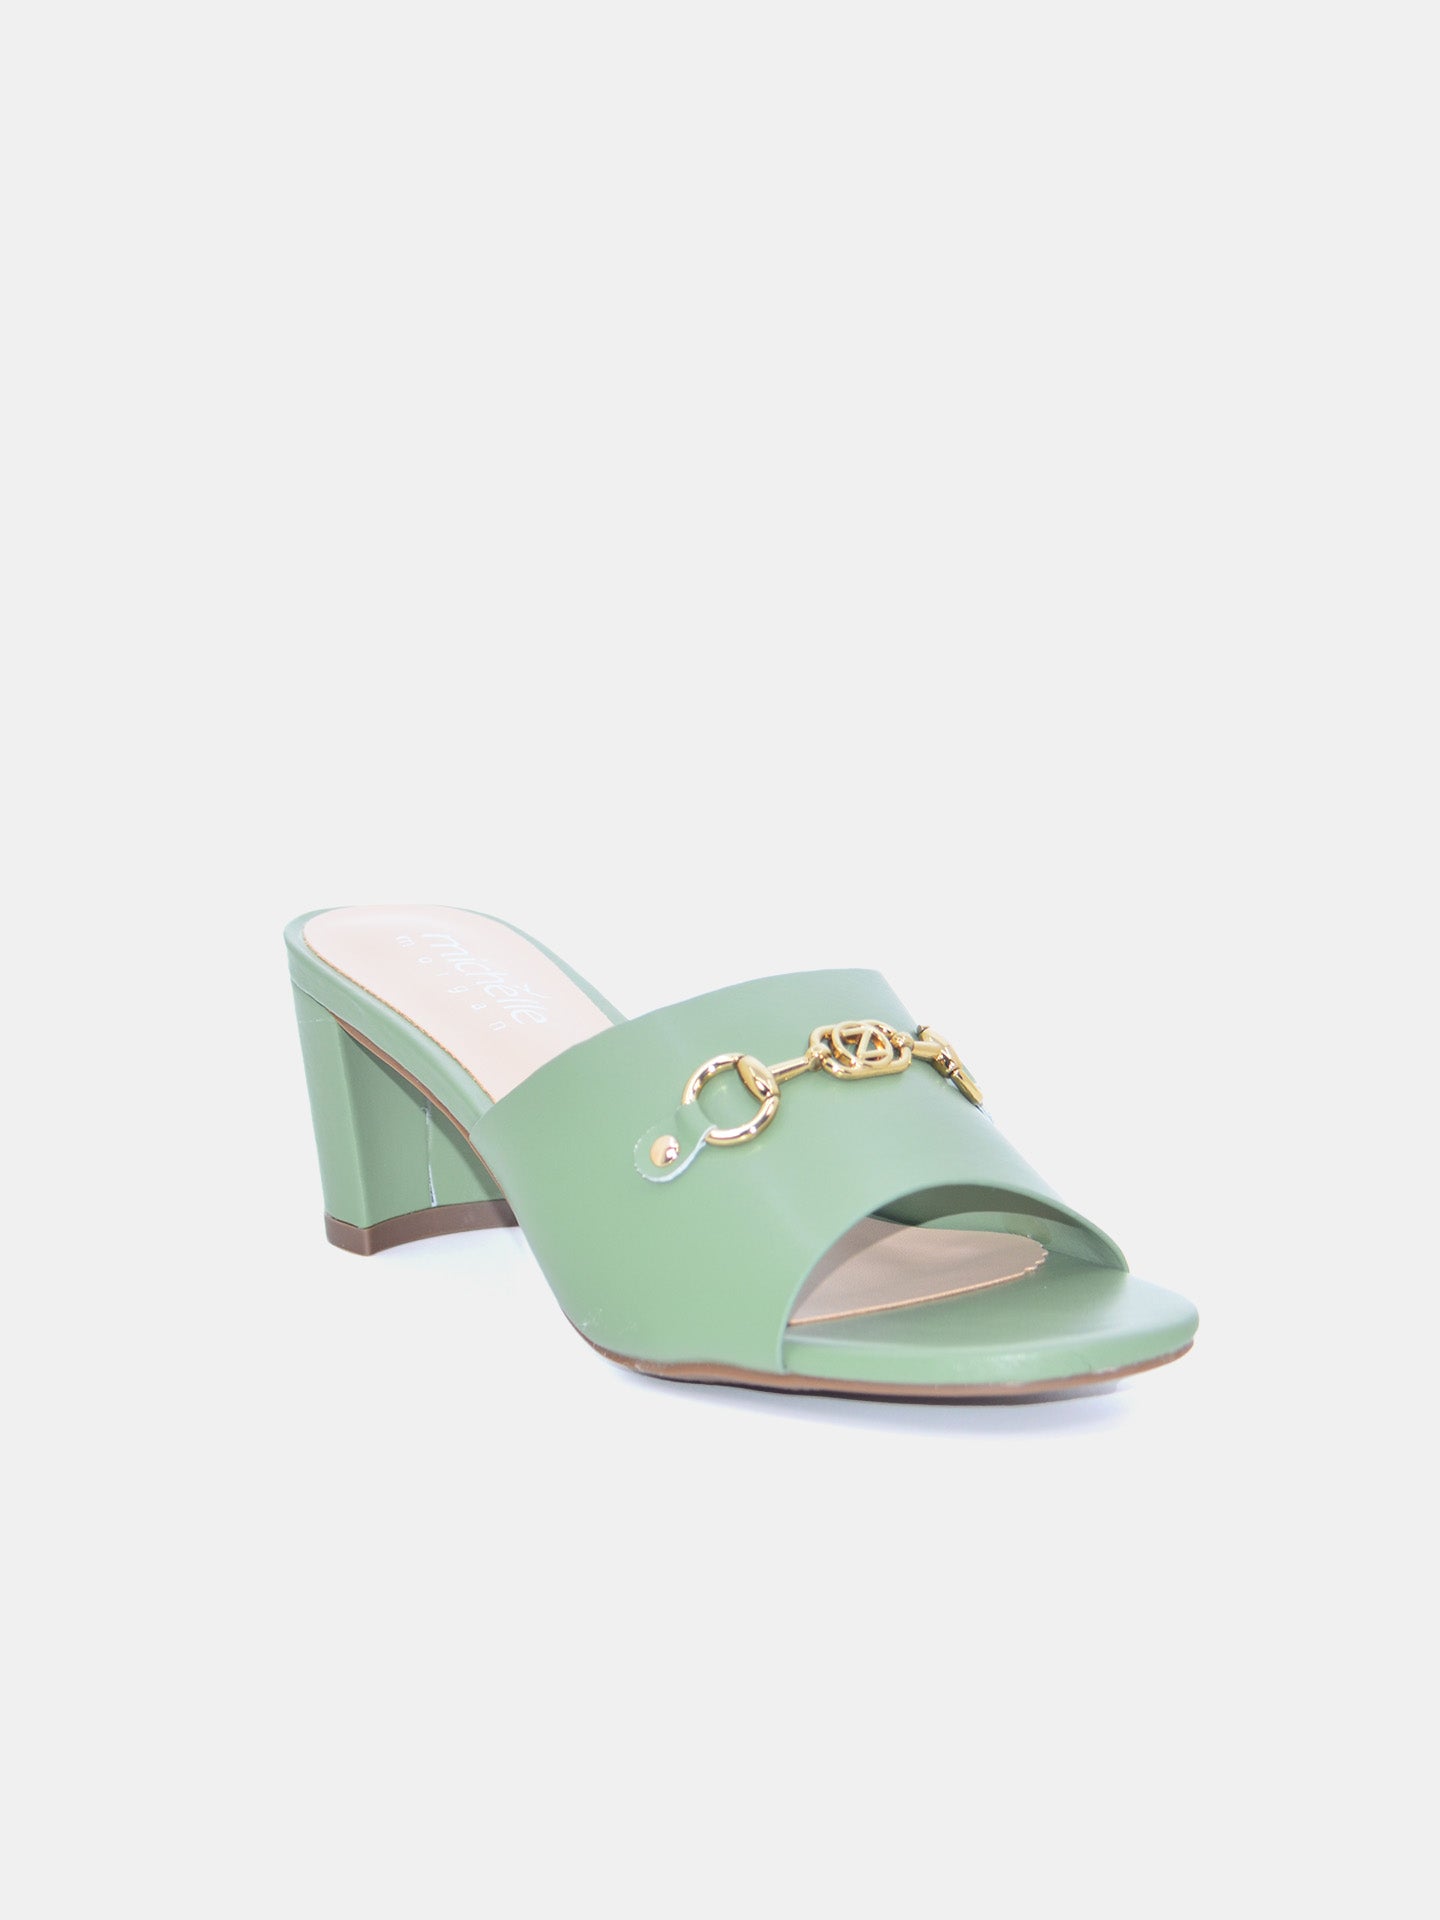 Michelle Morgan 213RC193 Women's Heeled Sandals #color_Green